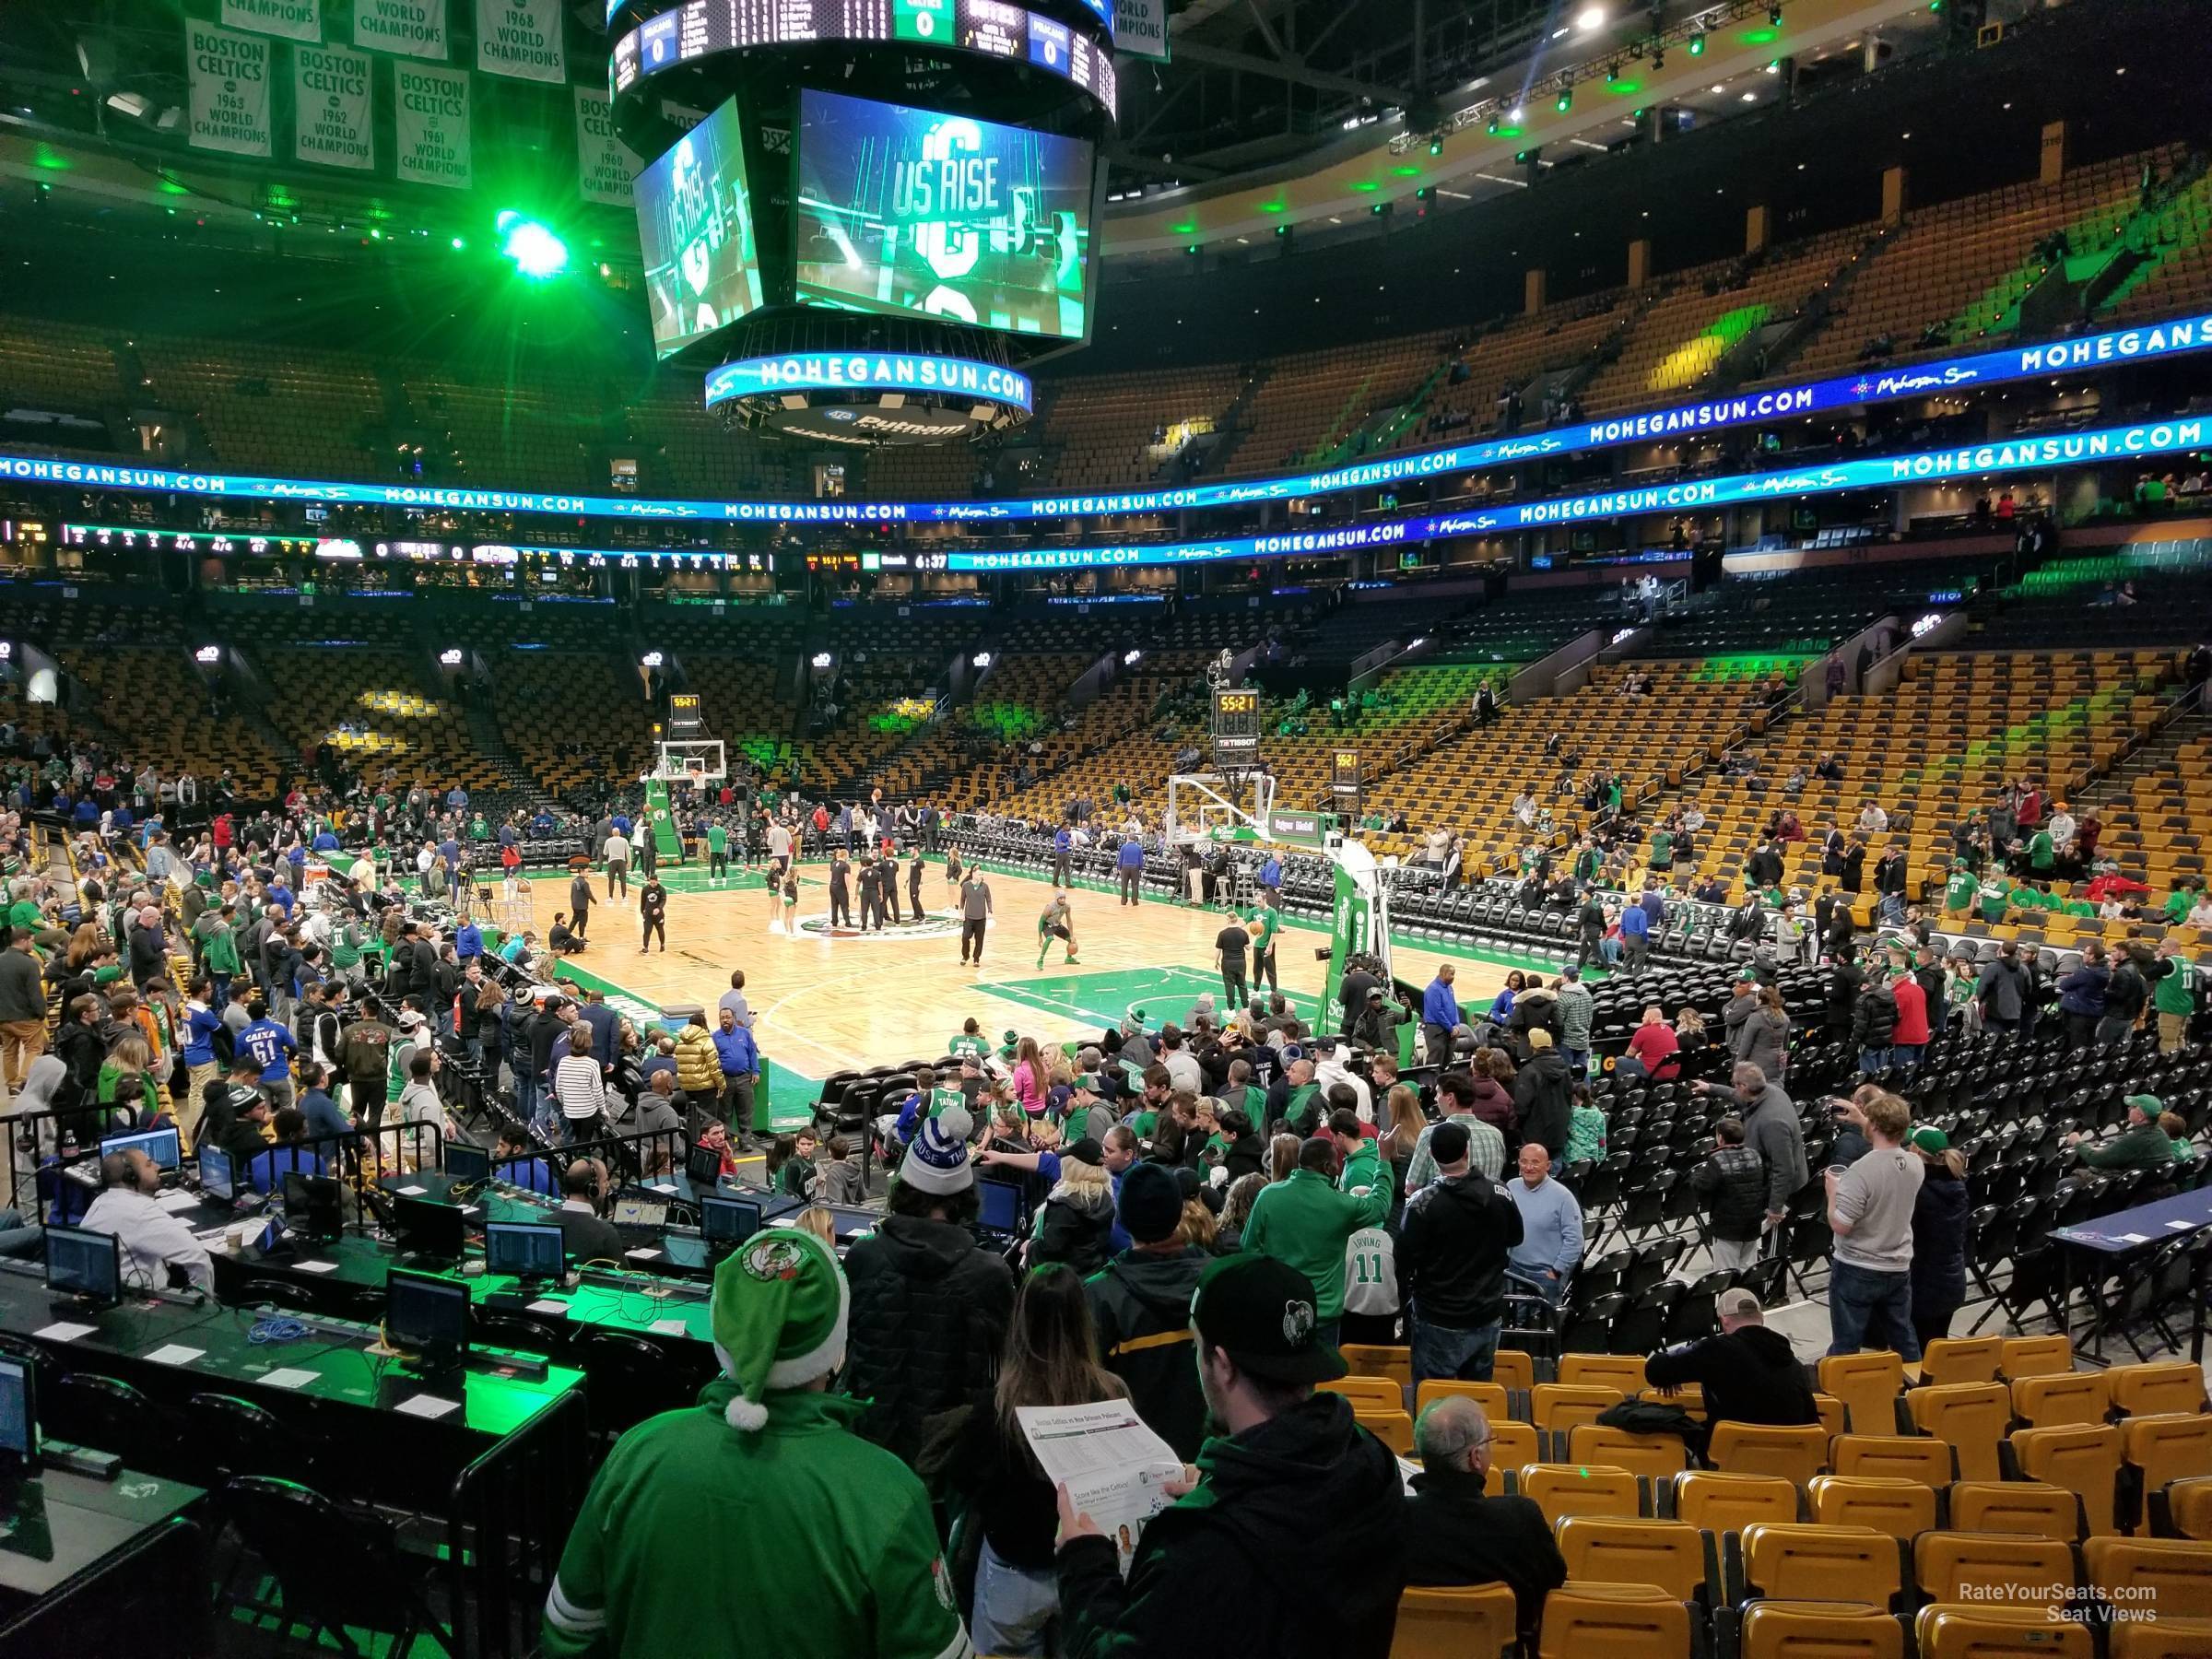 loge 19, row 13 seat view  for basketball - td garden